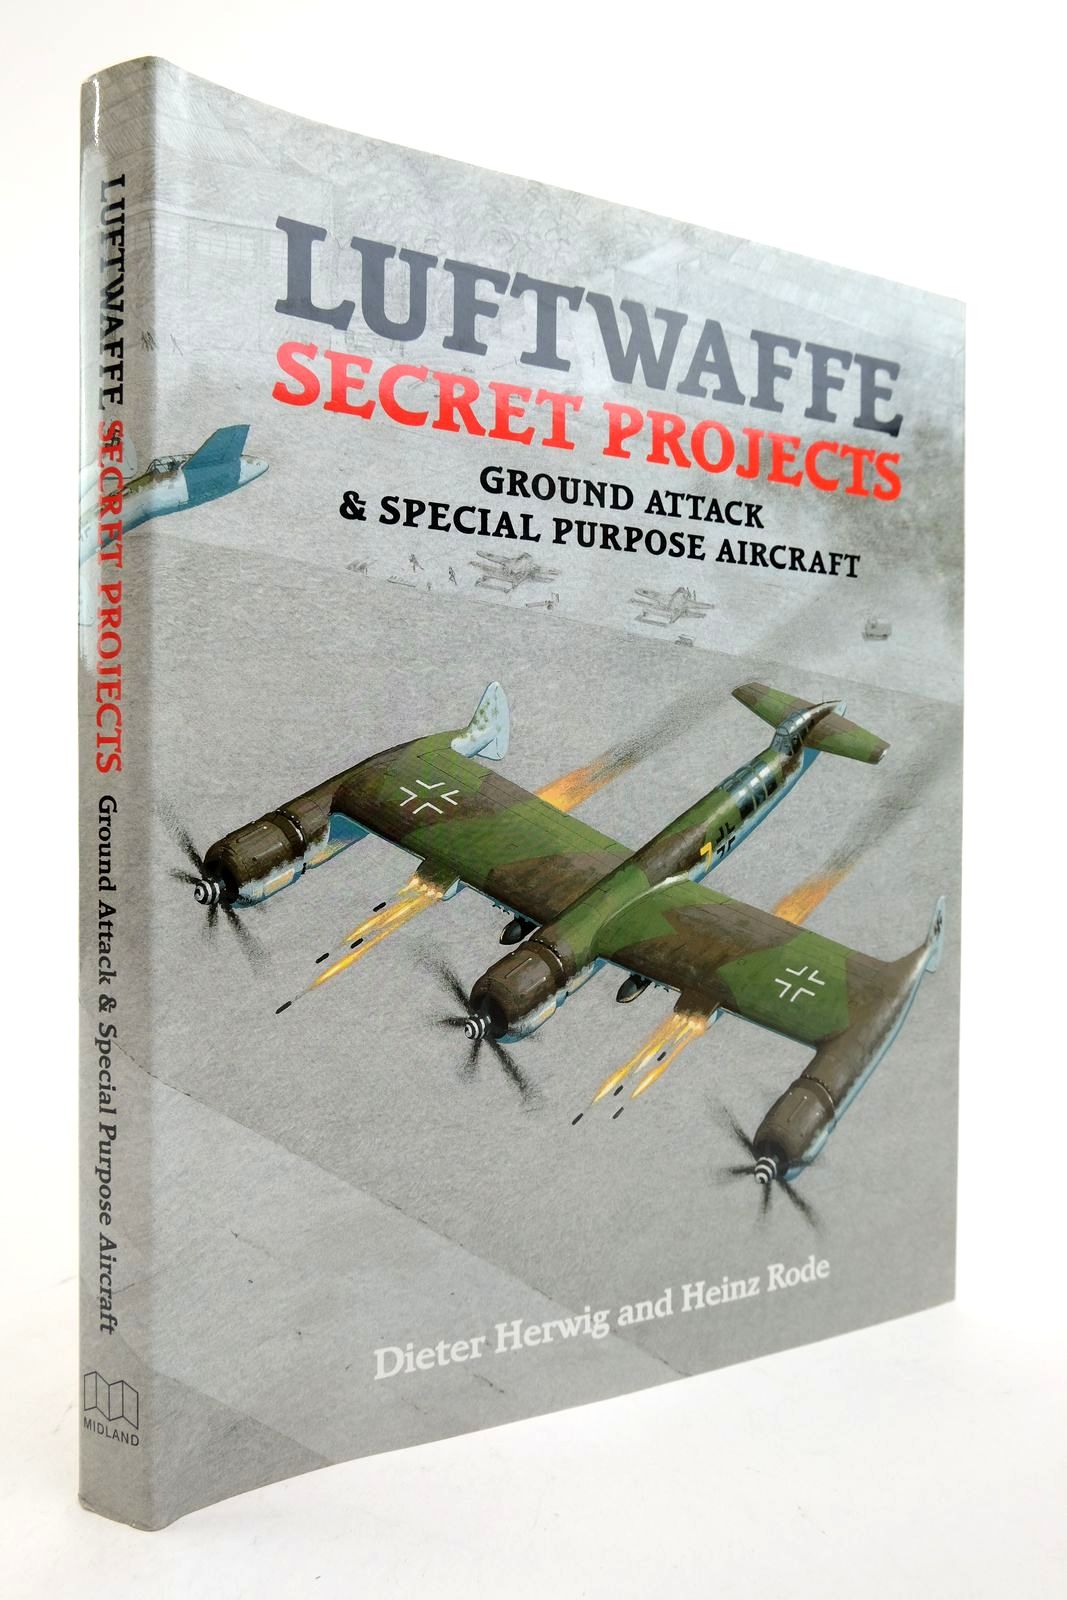 Photo of LUFTWAFFE SECRET PROJECTS GROUND ATTACK & SPECIAL PURPOSE AIRCRAFT written by Herwig, Dieter published by Midland Publishing (STOCK CODE: 2139375)  for sale by Stella & Rose's Books